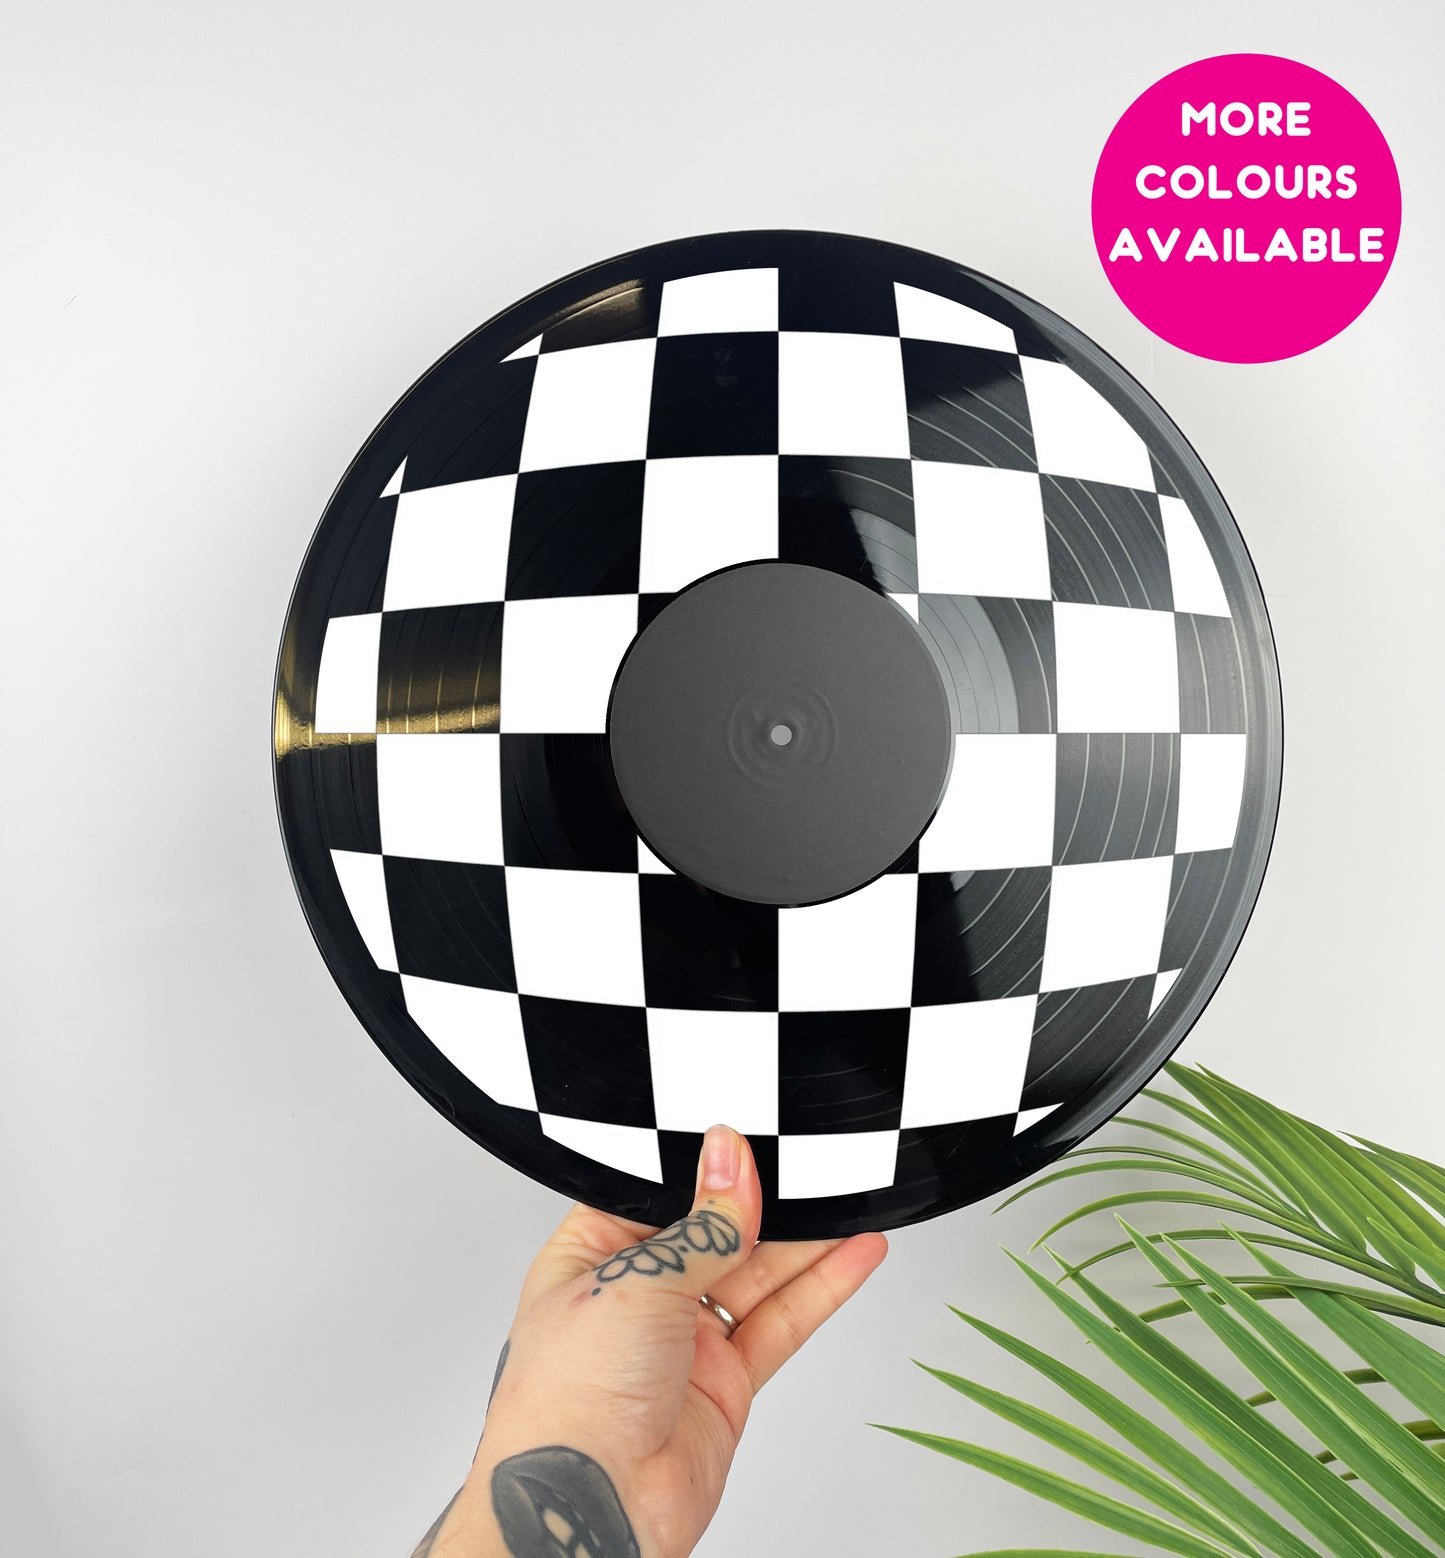 Checkerboard upcycled vintage 12" LP vinyl record home decor